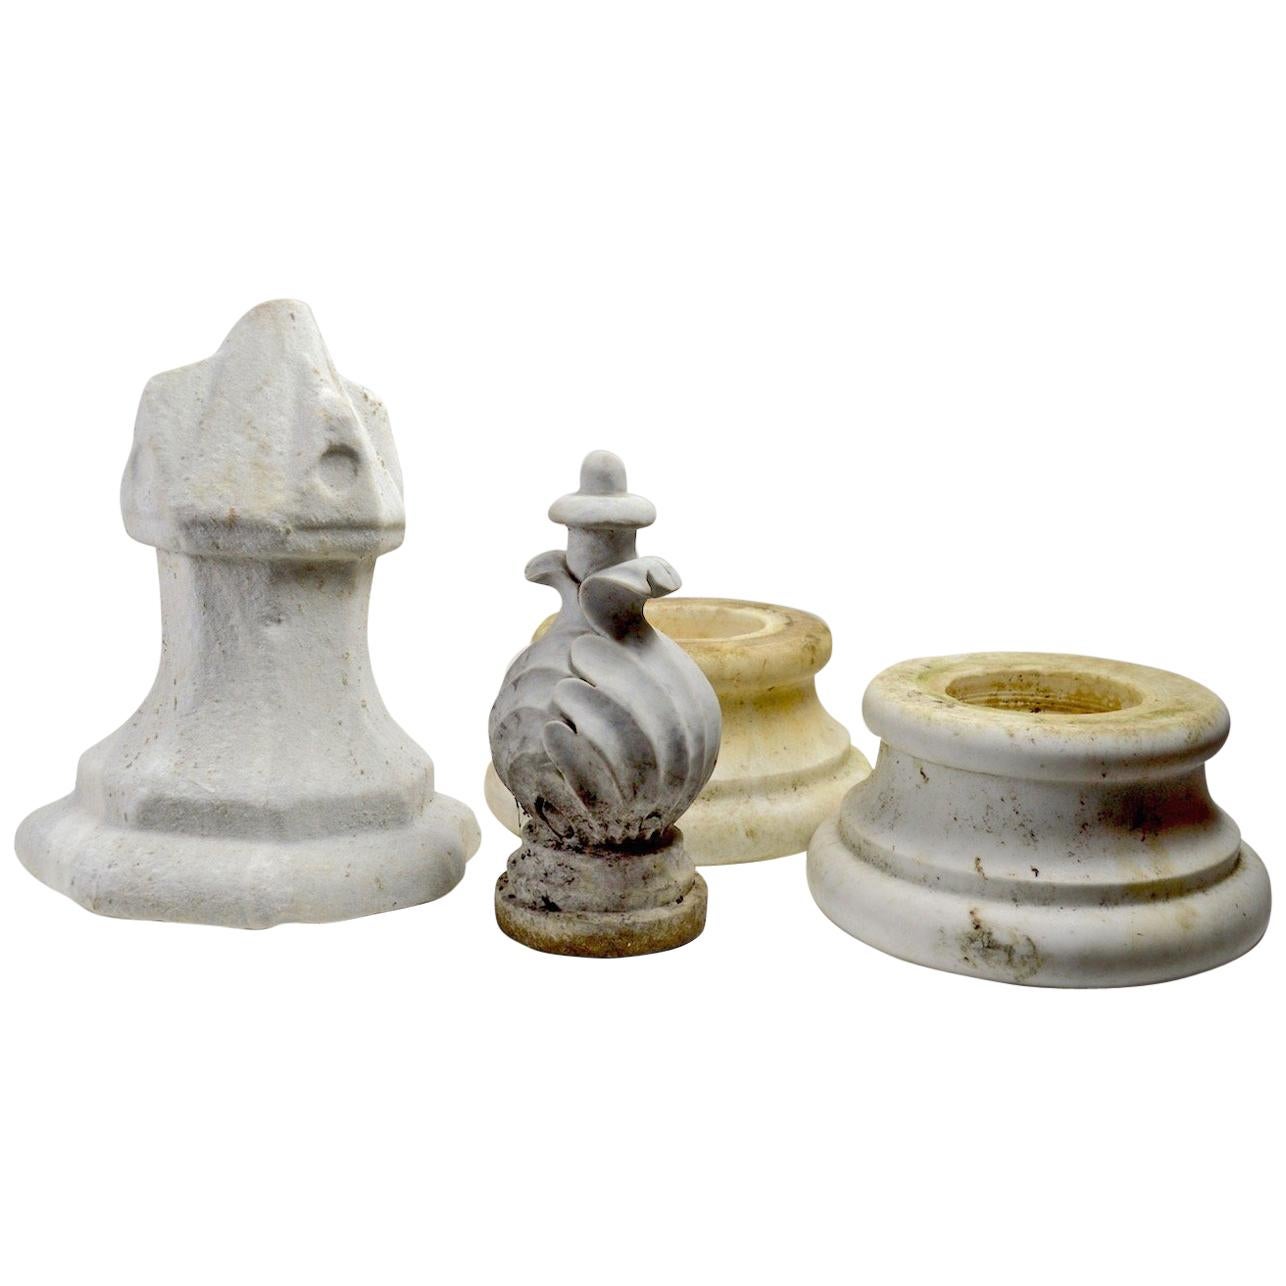 Group of Architectural Garden Marble Fragments